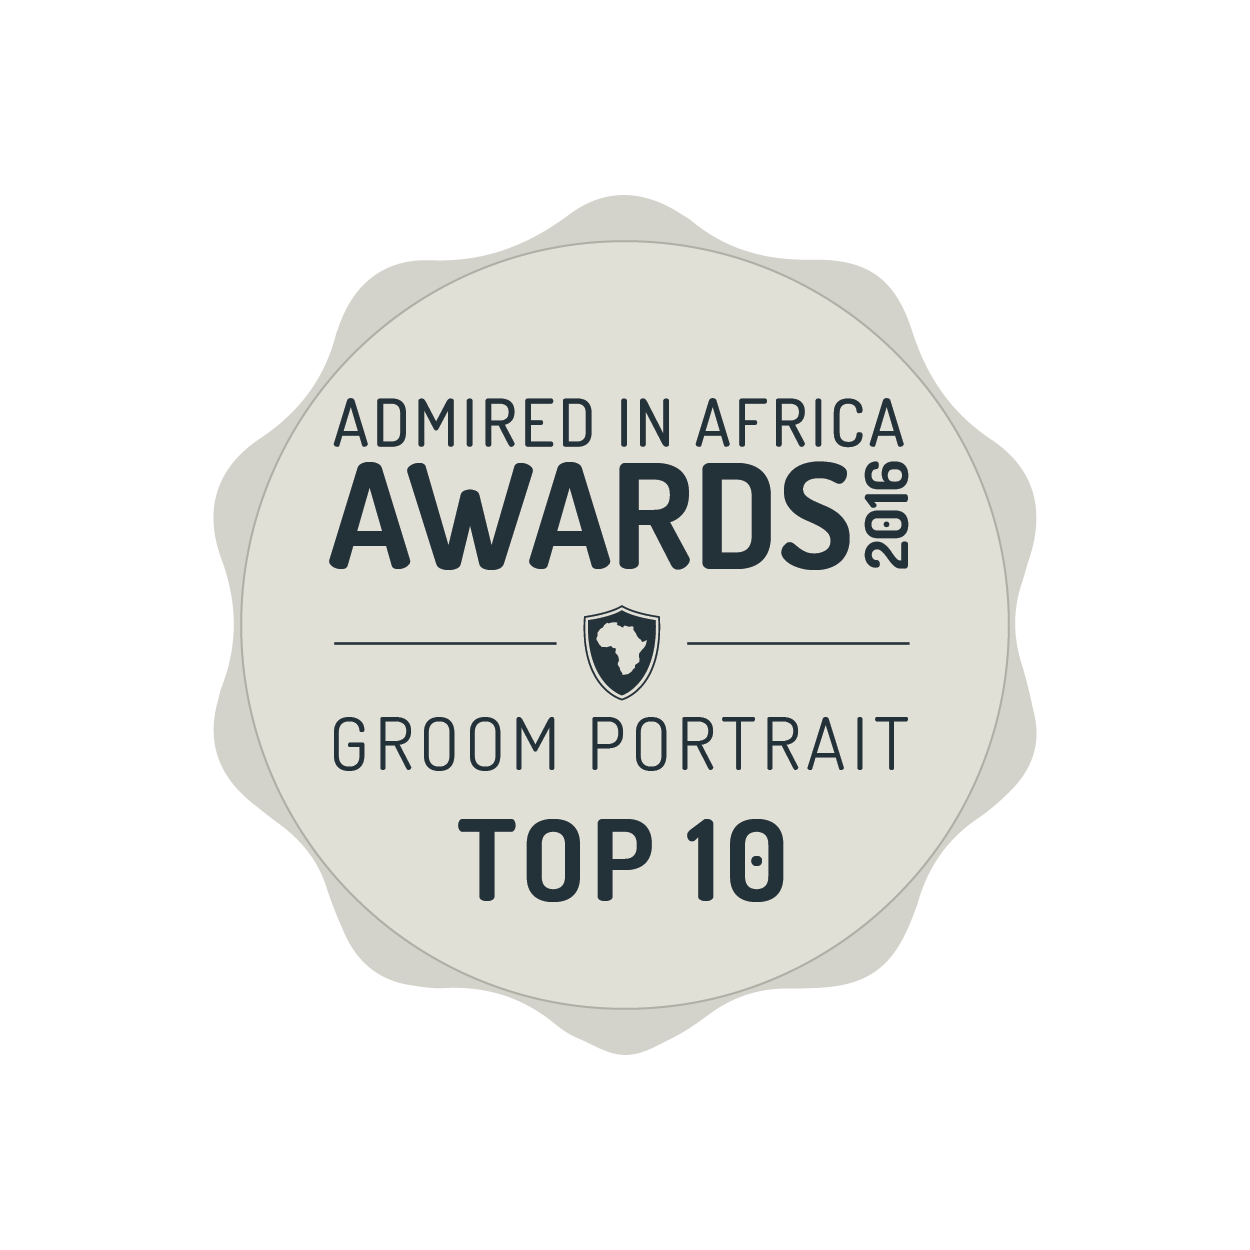 Admired in Africa top10